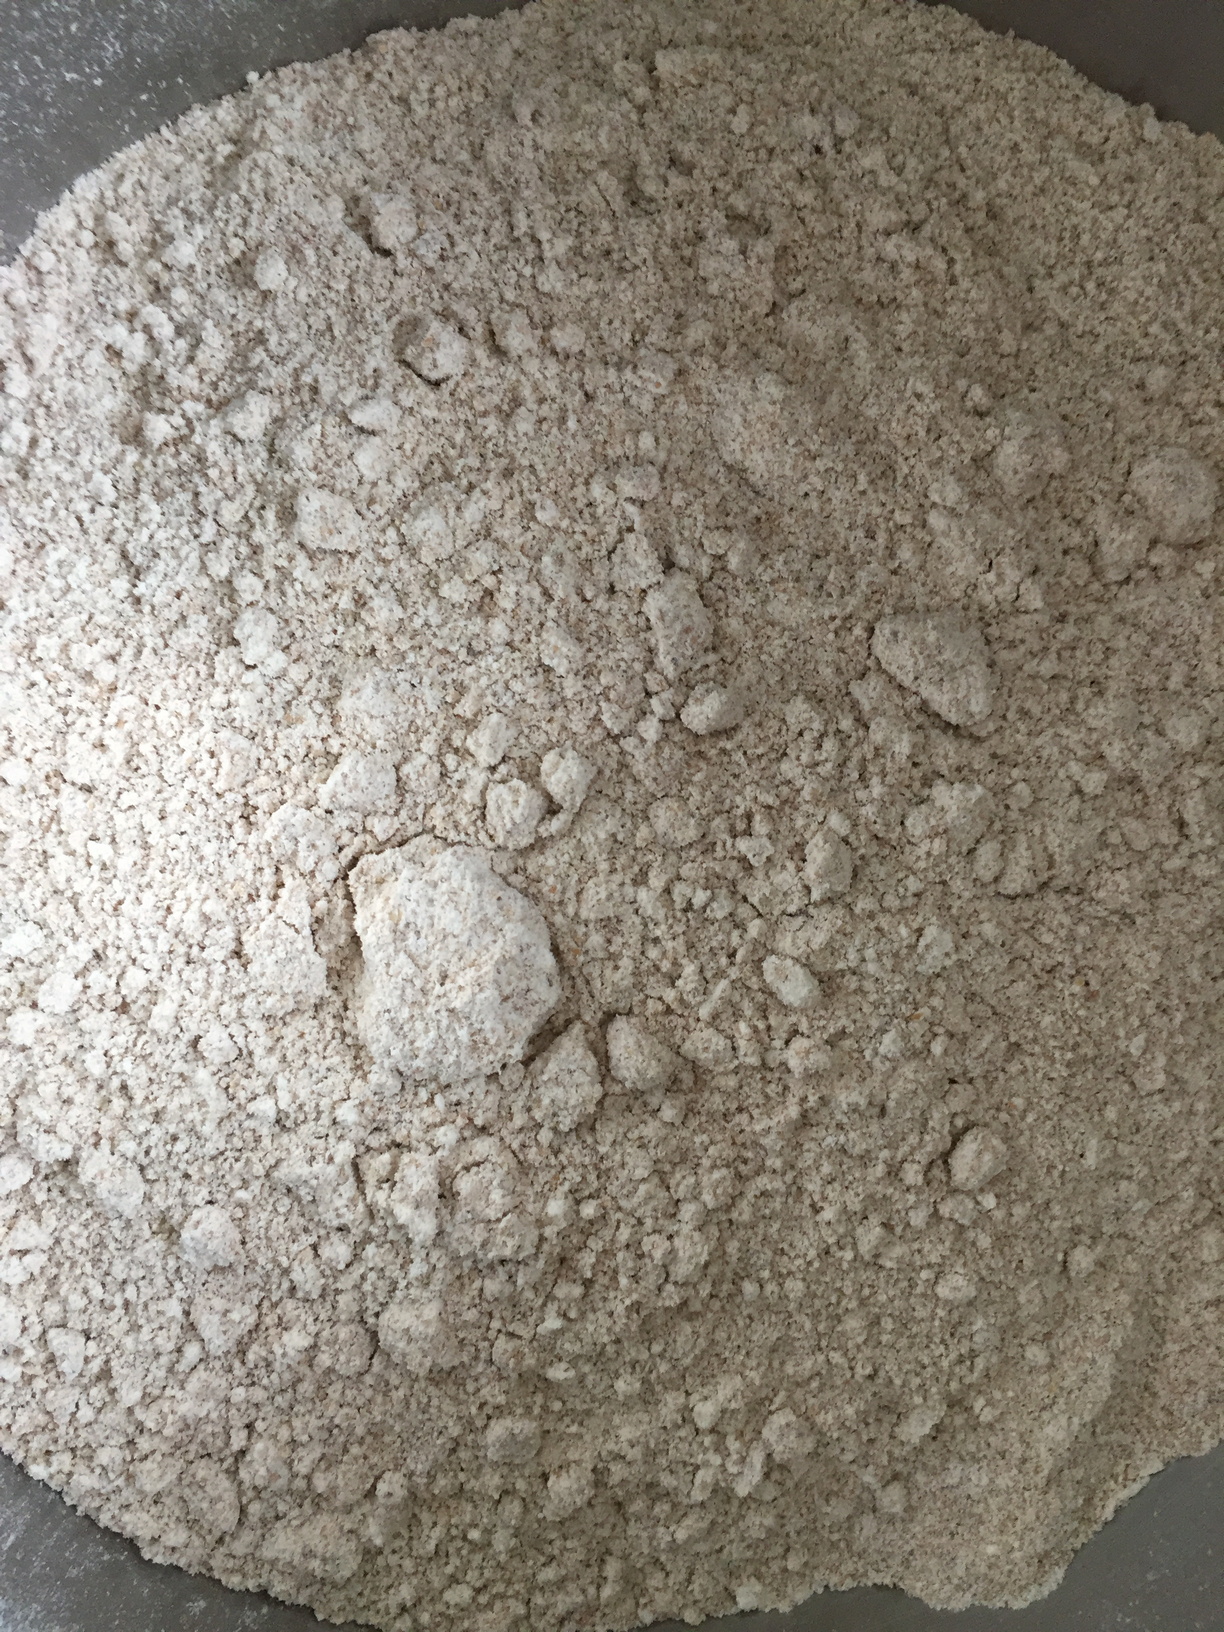 The chopped flour. You can see that it does have a gritty texture.